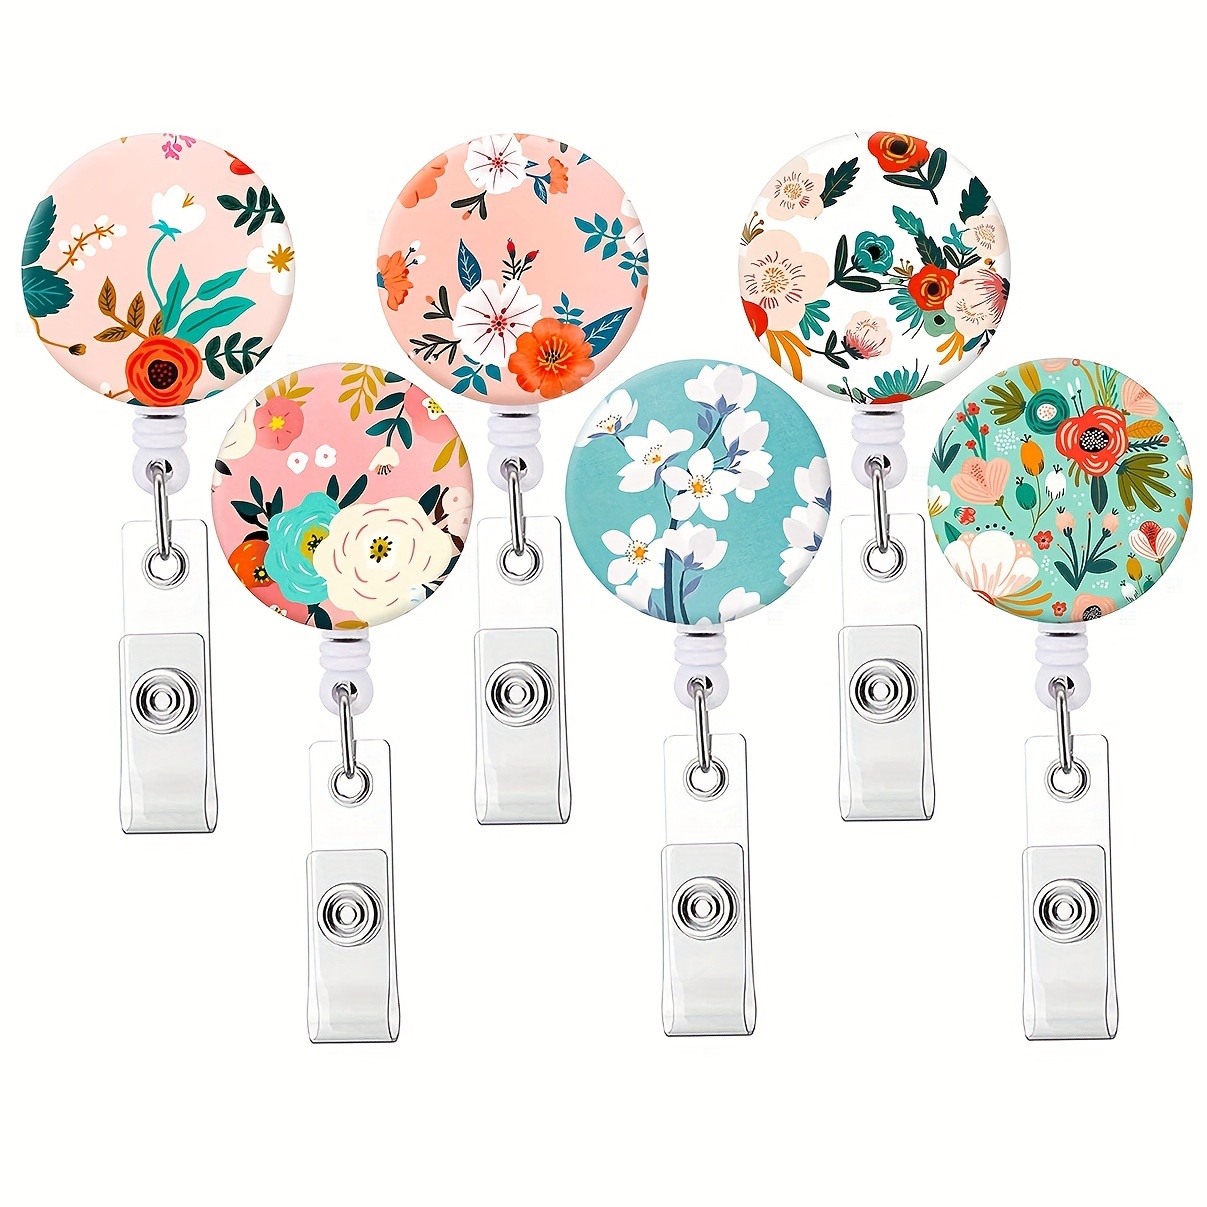 Retractable Badge Reel Clip, Badge Holder With Alligator Clip, Cute Badge  Clip On ID Name Card Holders For Nurse Doctor And Office (6Pack Flowers)